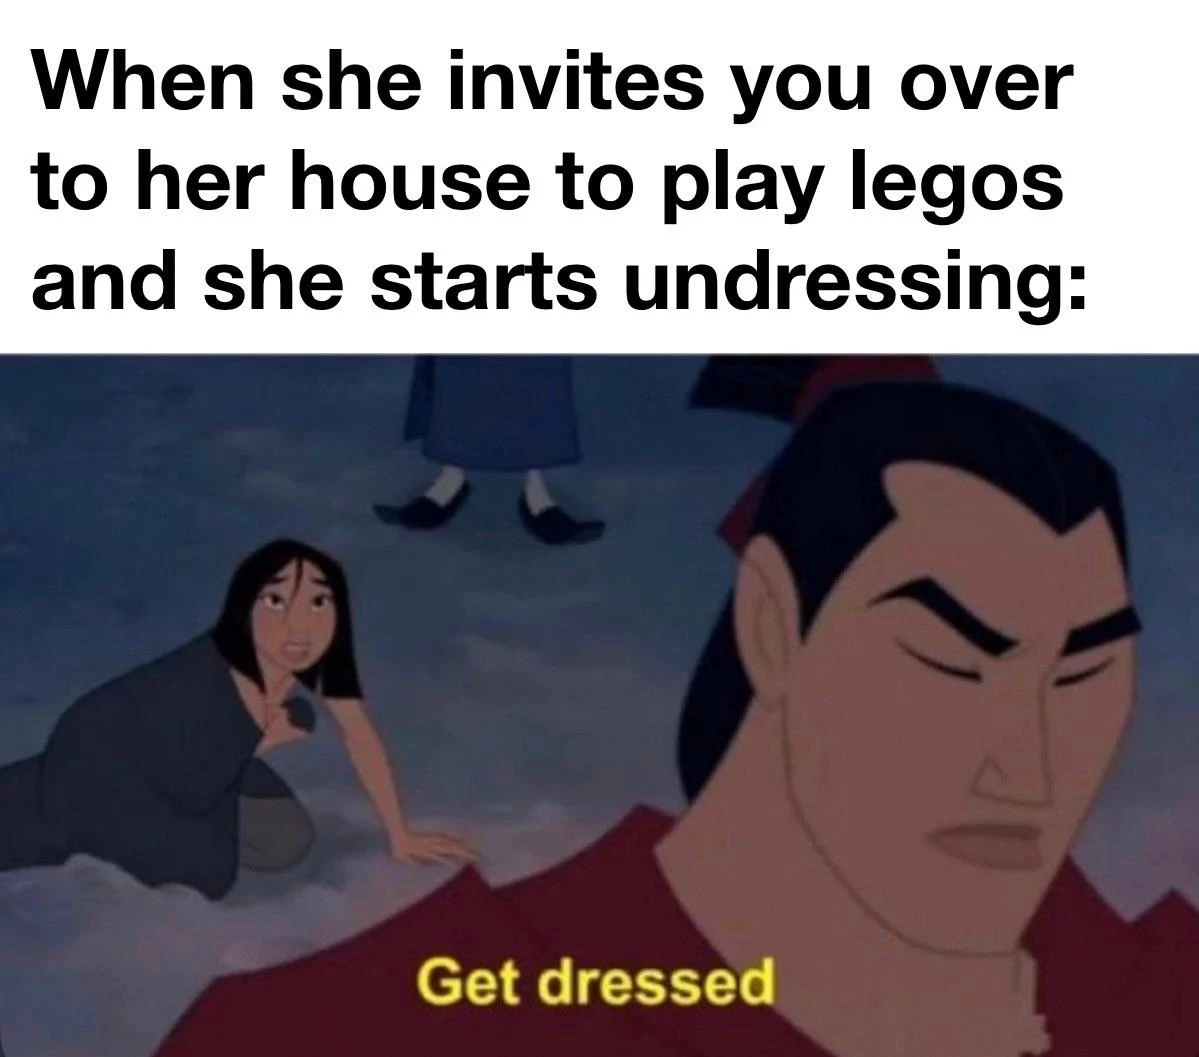 We Can’t Play Lego Without Clothes, Remember?